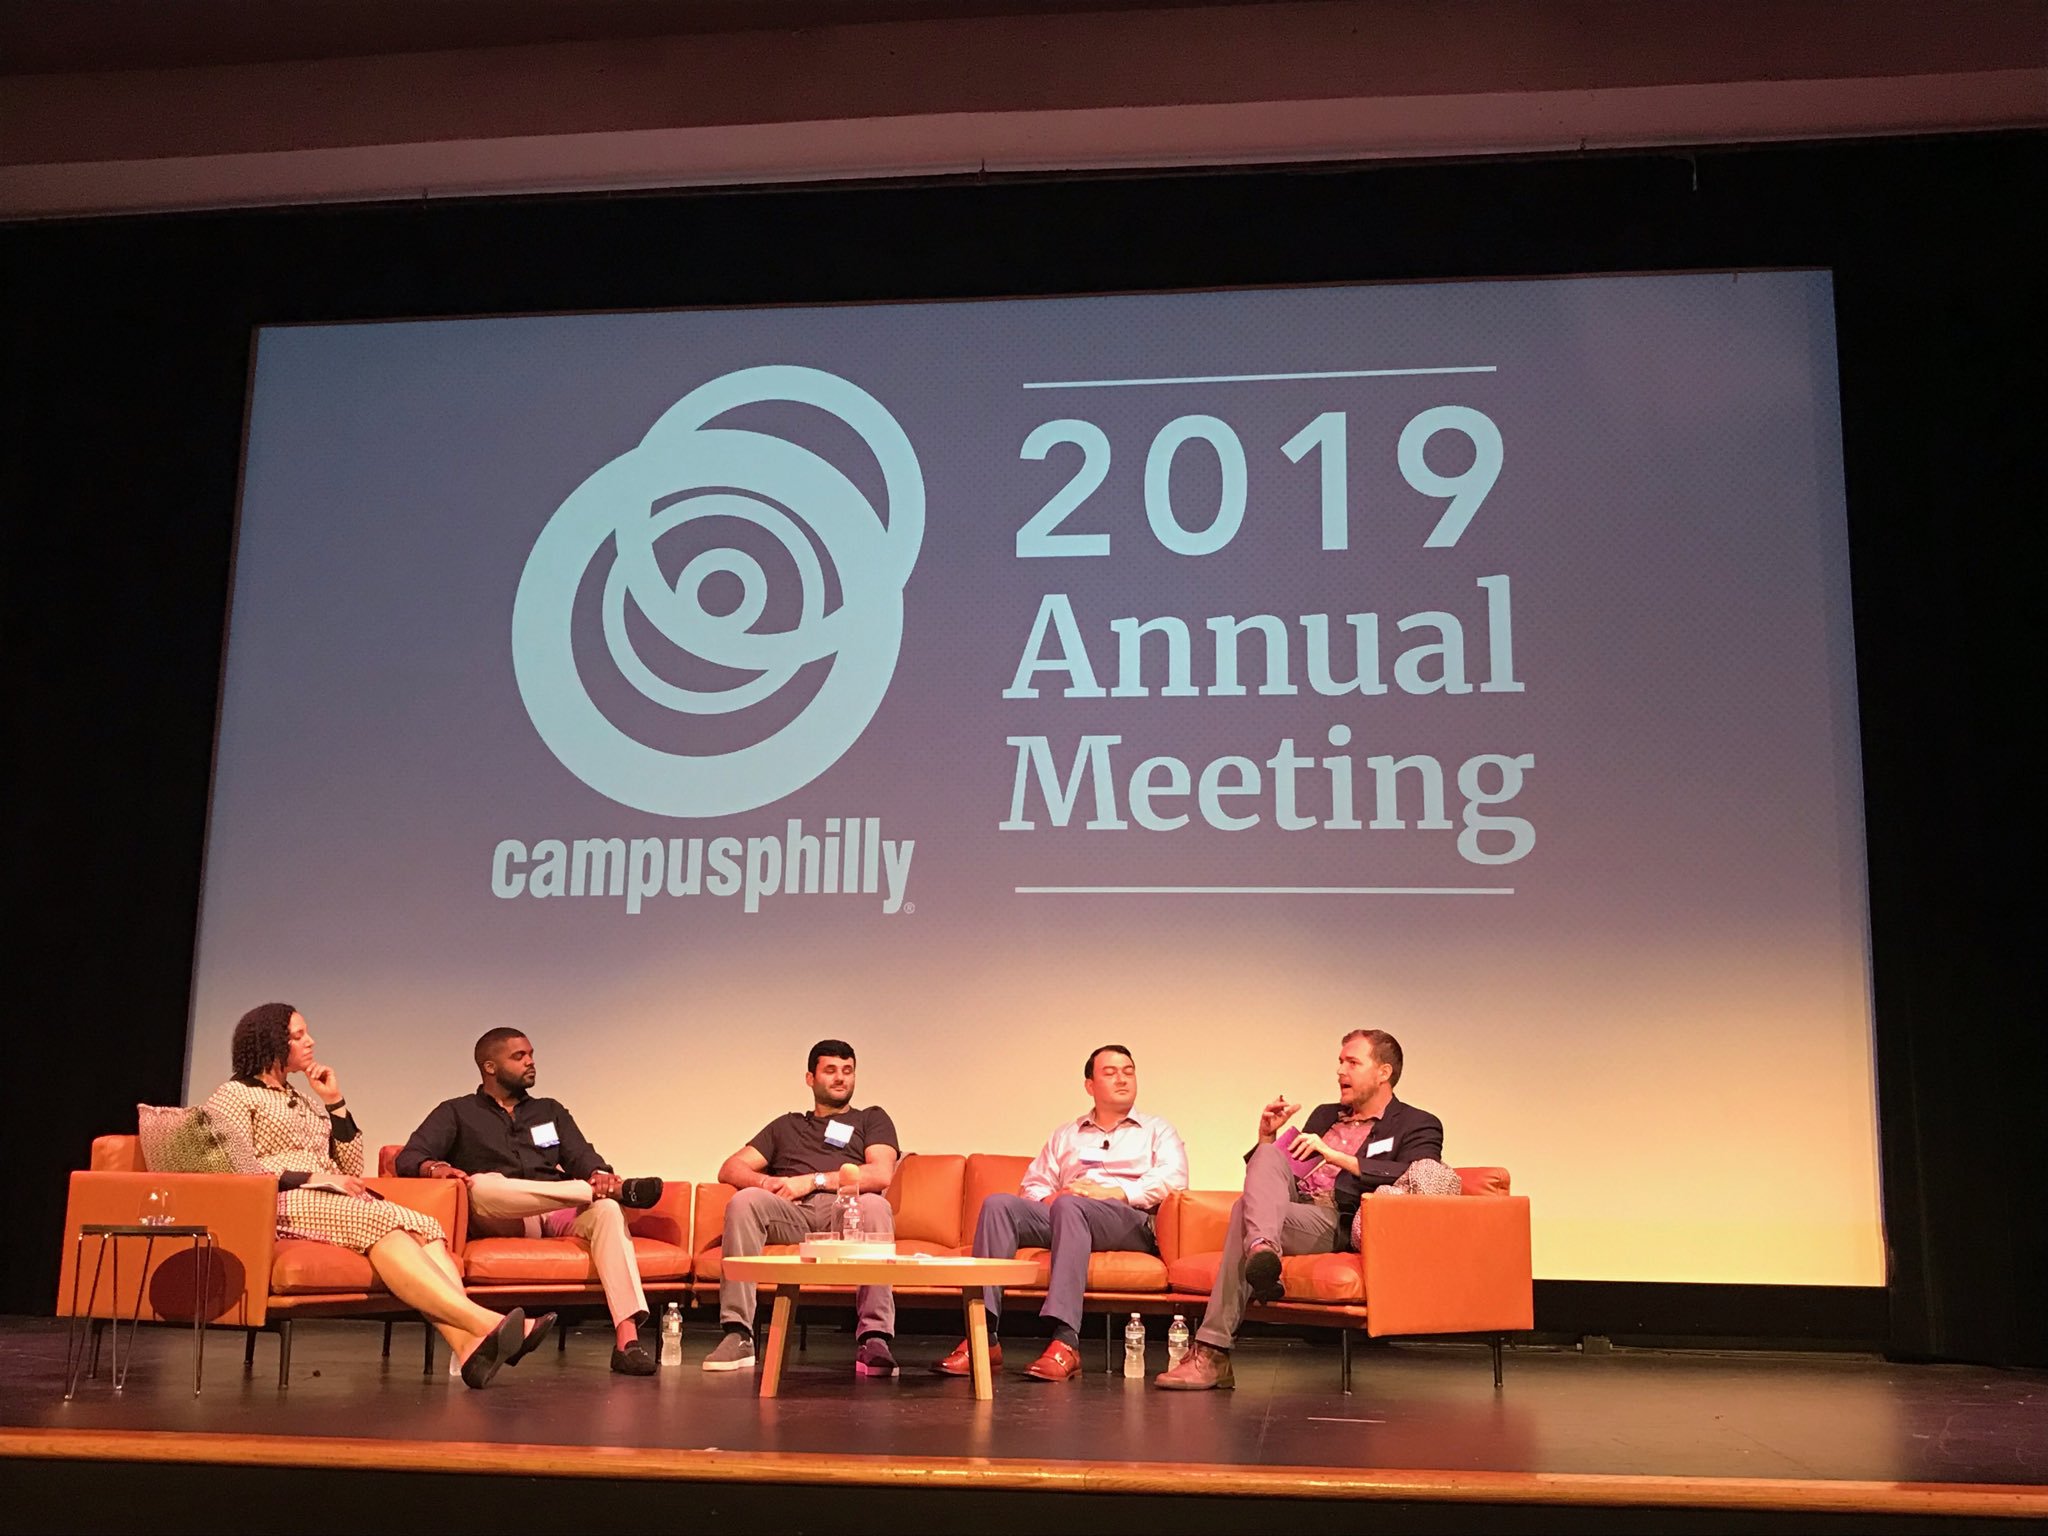 Five people in chairs with the Campus Philly logo on the screen